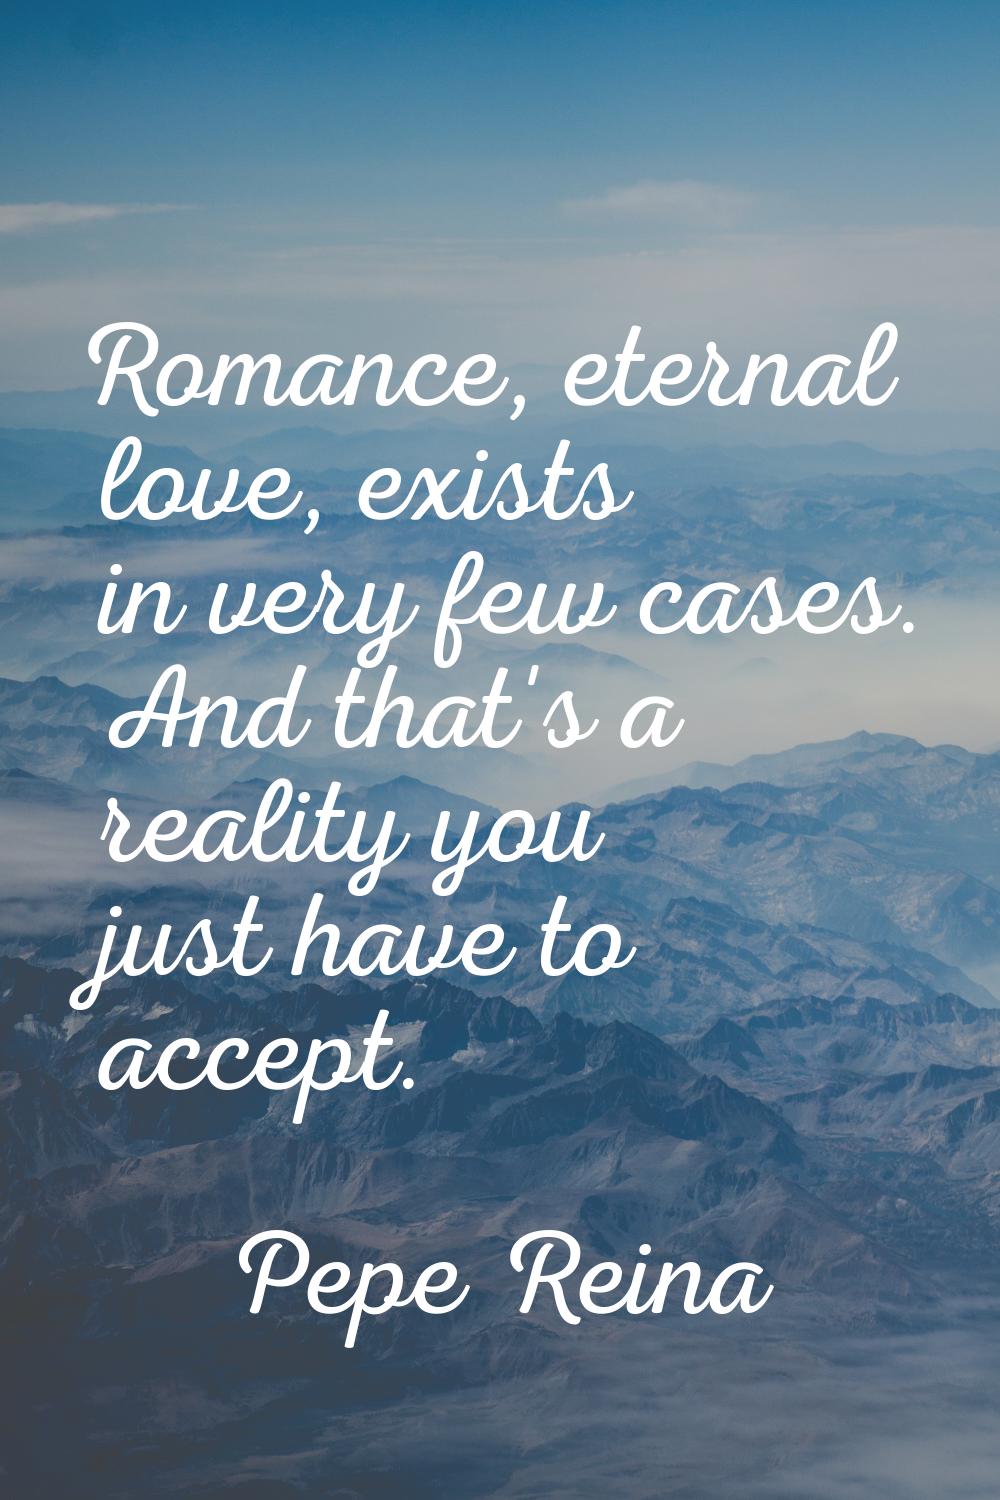 Romance, eternal love, exists in very few cases. And that's a reality you just have to accept.